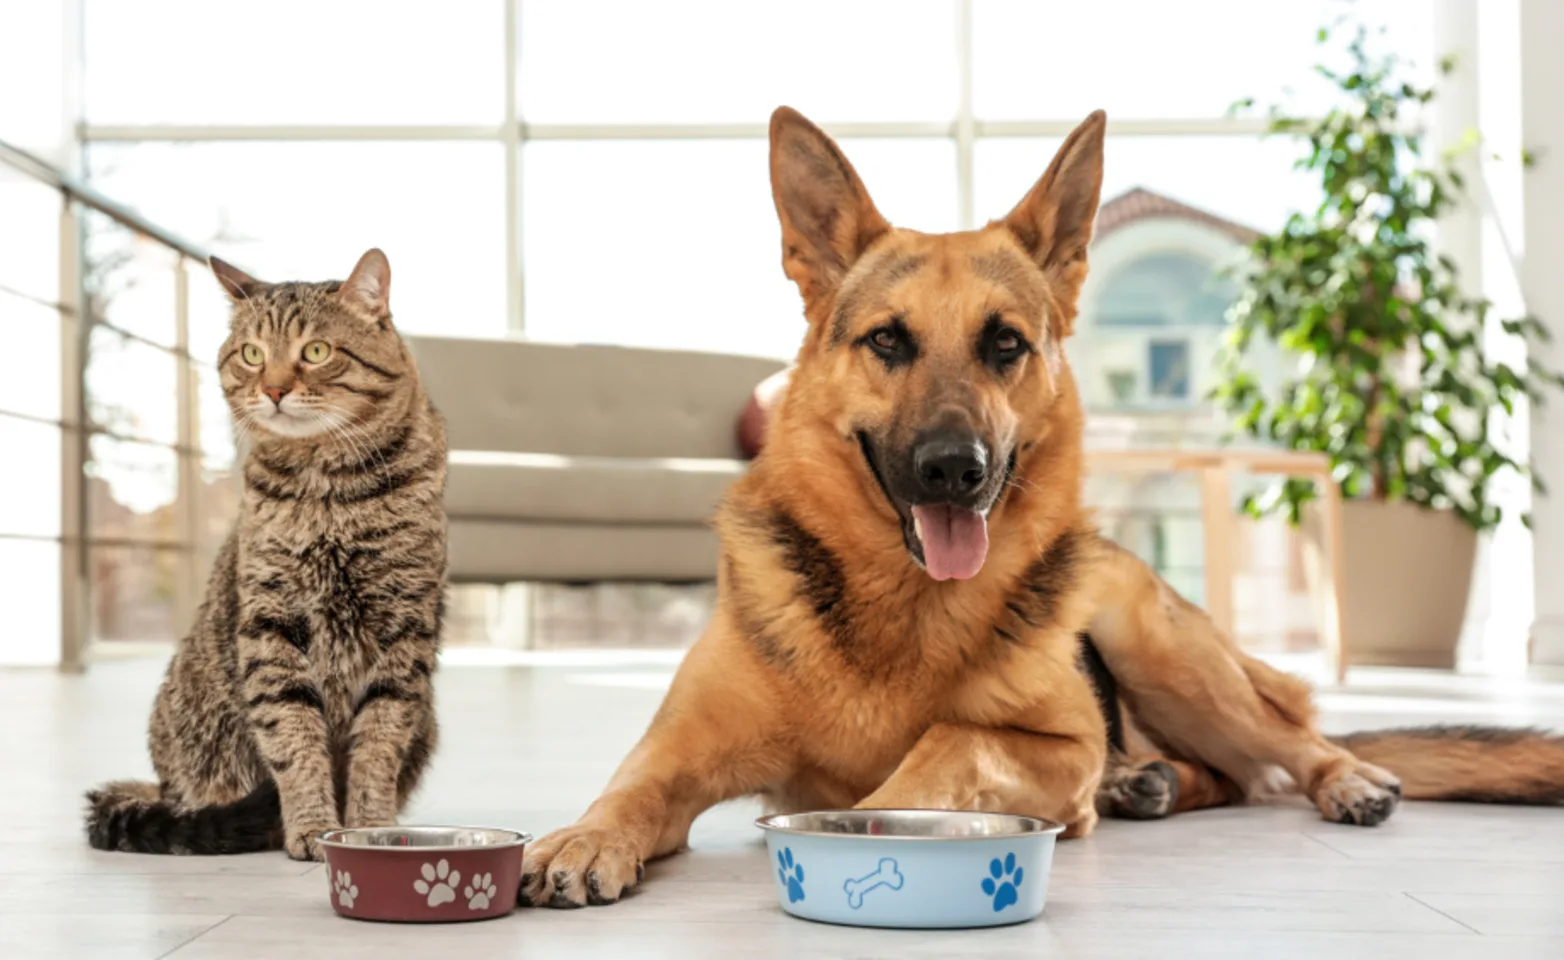 Cat & Dog Waiting For Food